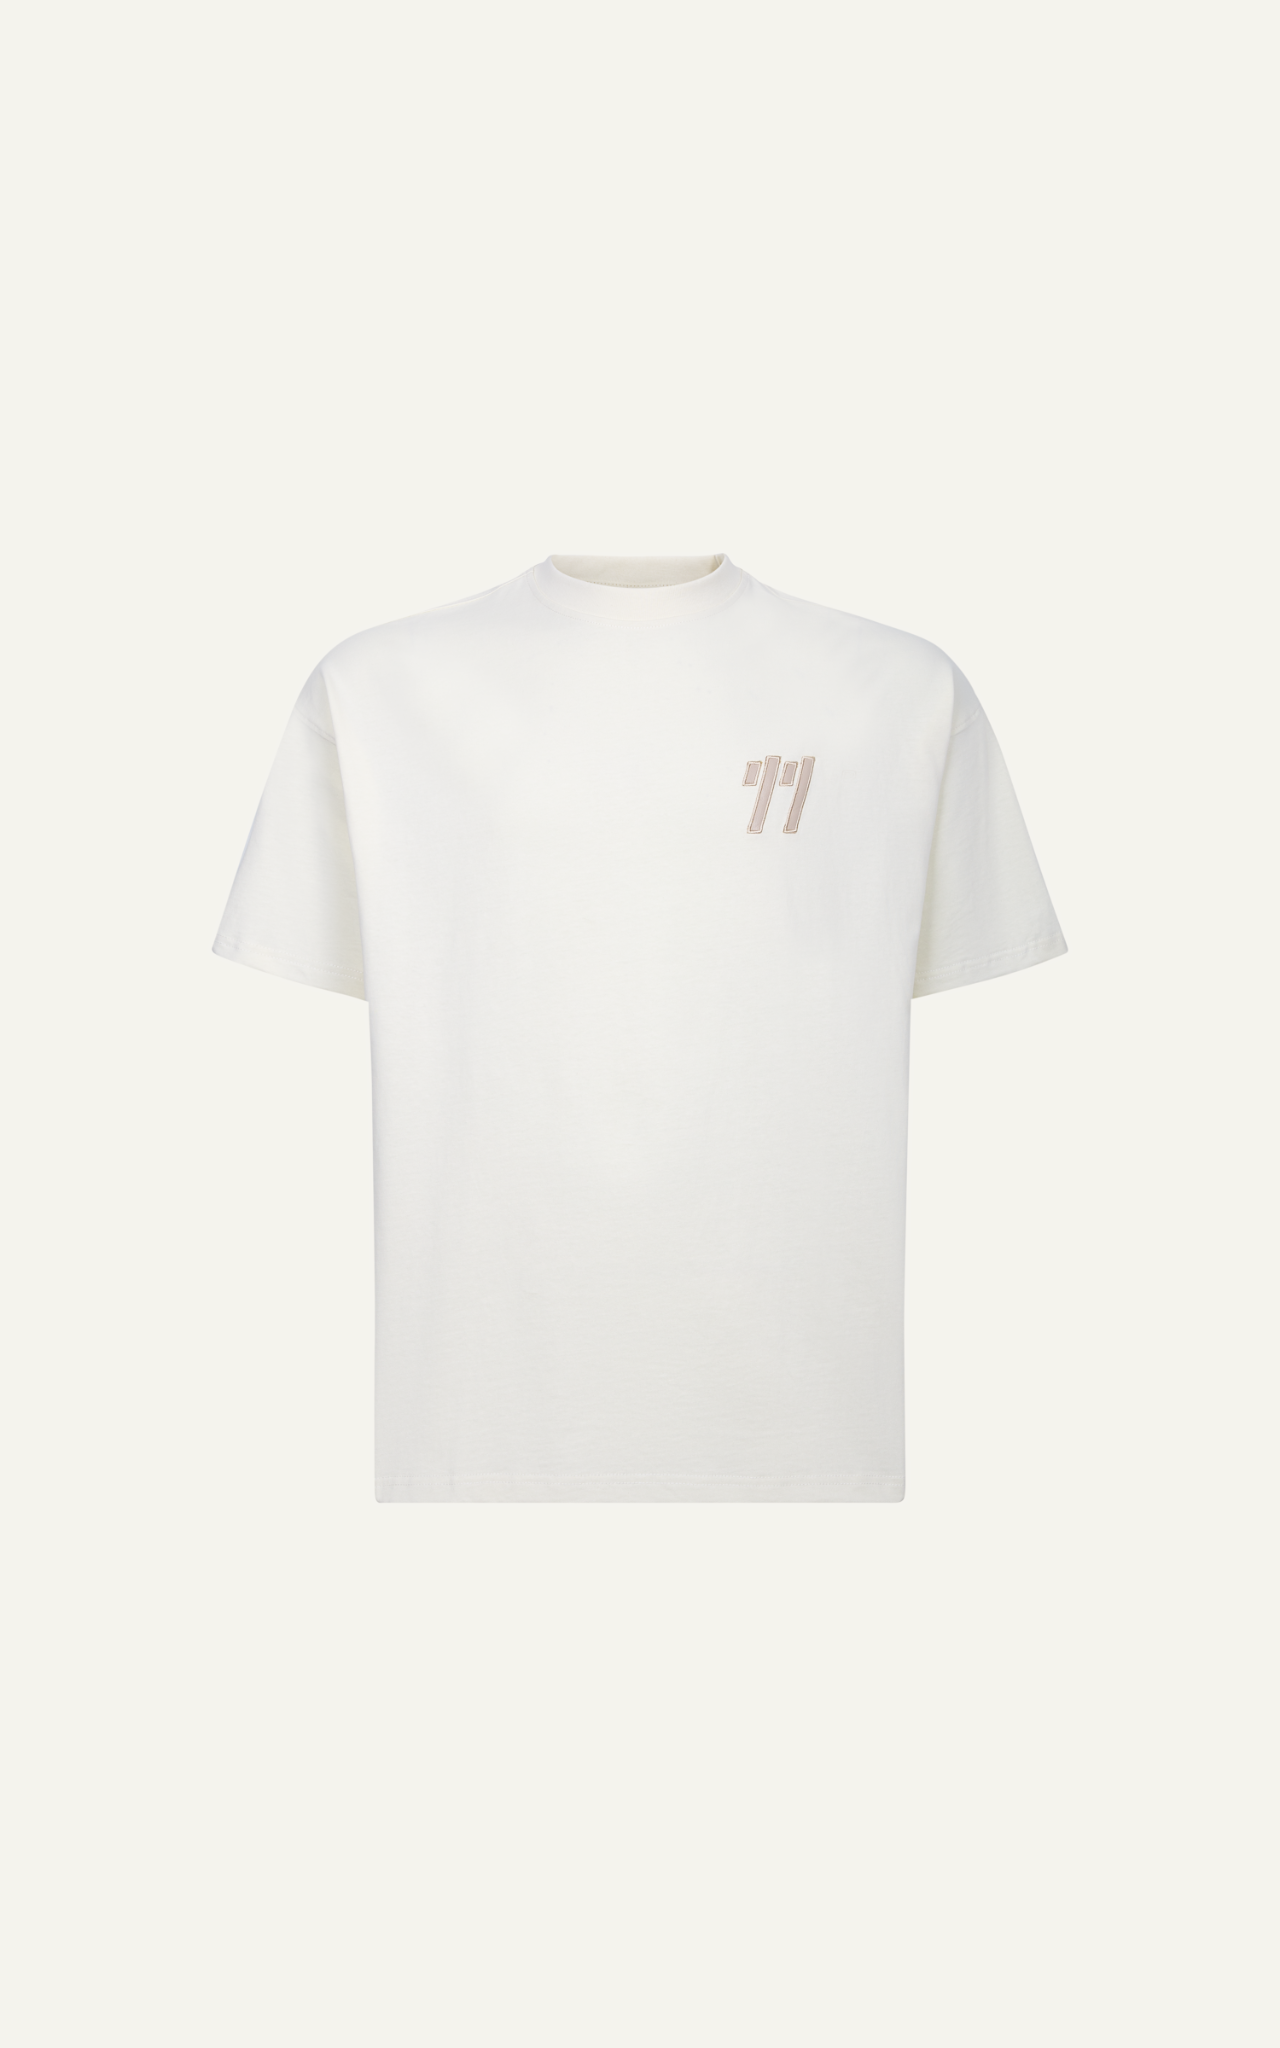  AG30 FACTORY LOOSE FIT NEW LOGO T-SHIRT - OFF WHITE 